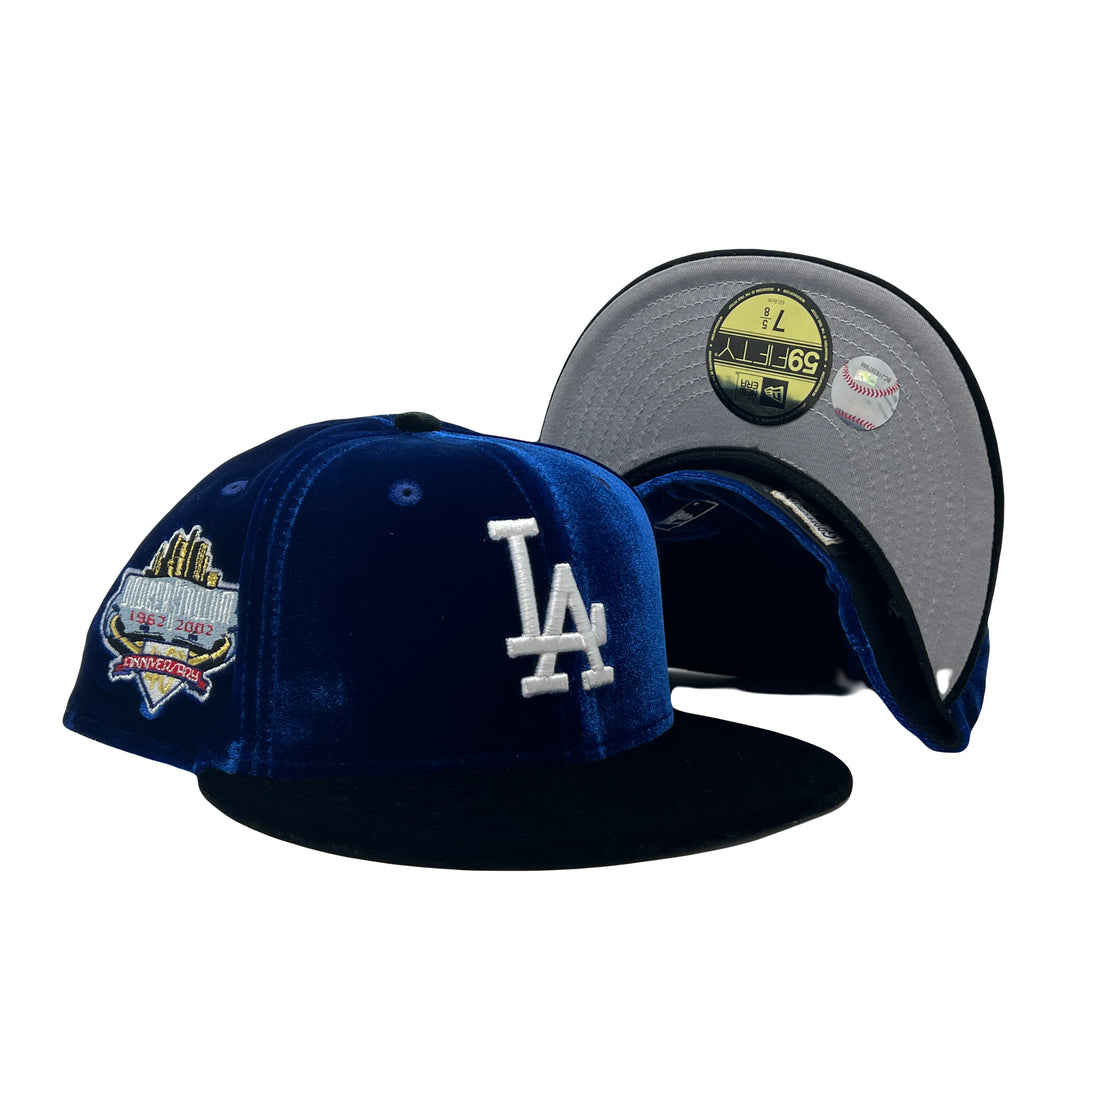 Los Angeles Dodgers 40th Anniversary Velvet Collection New Era Fitted Hat